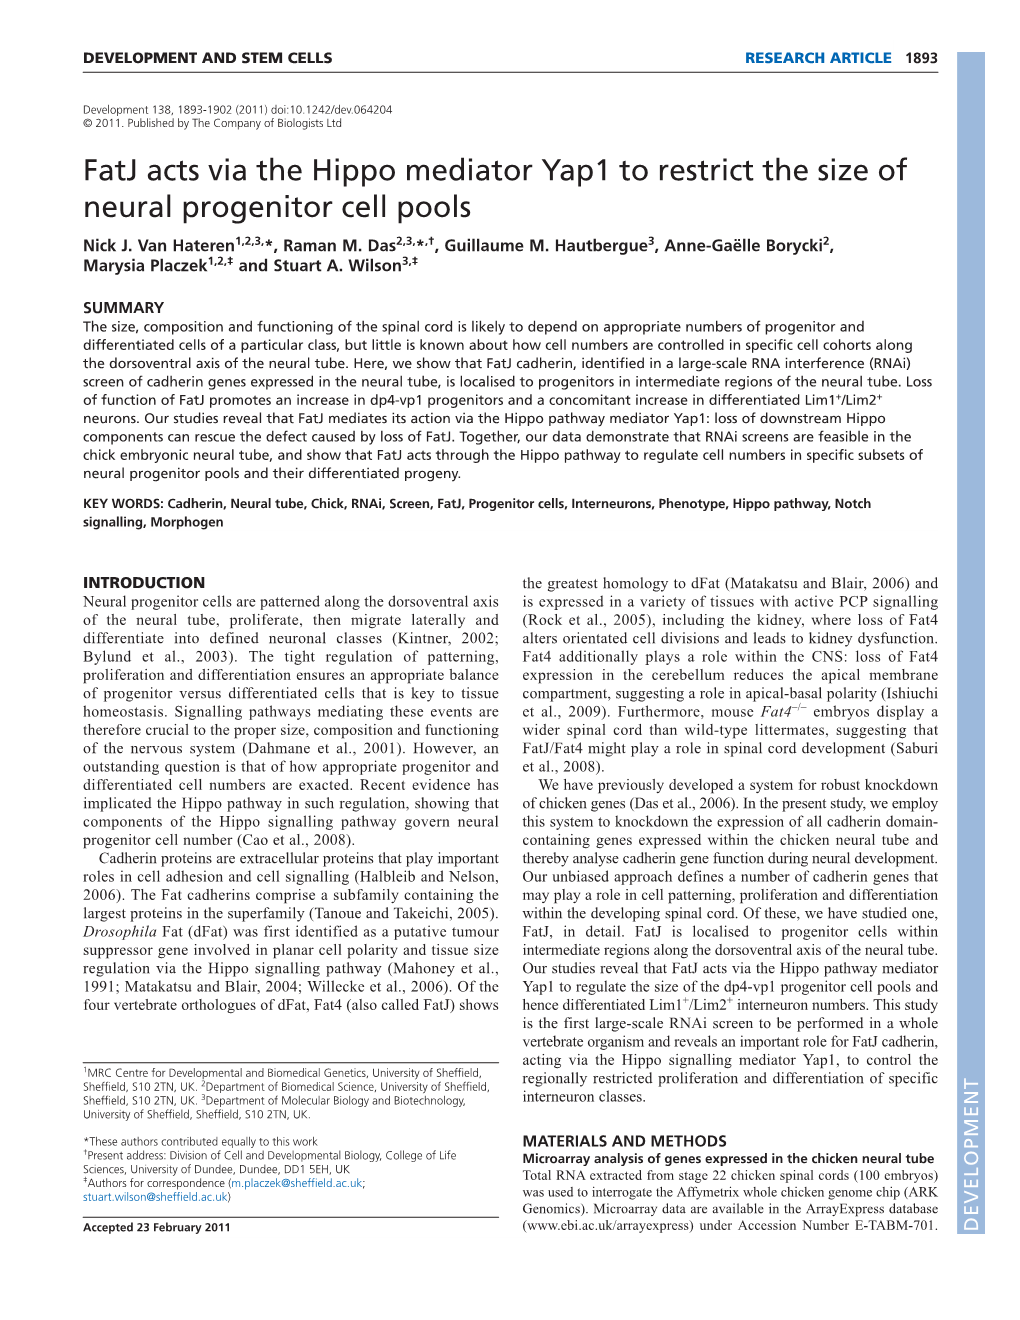 Fatj Acts Via the Hippo Mediator Yap1 to Restrict the Size of Neural Progenitor Cell Pools Nick J